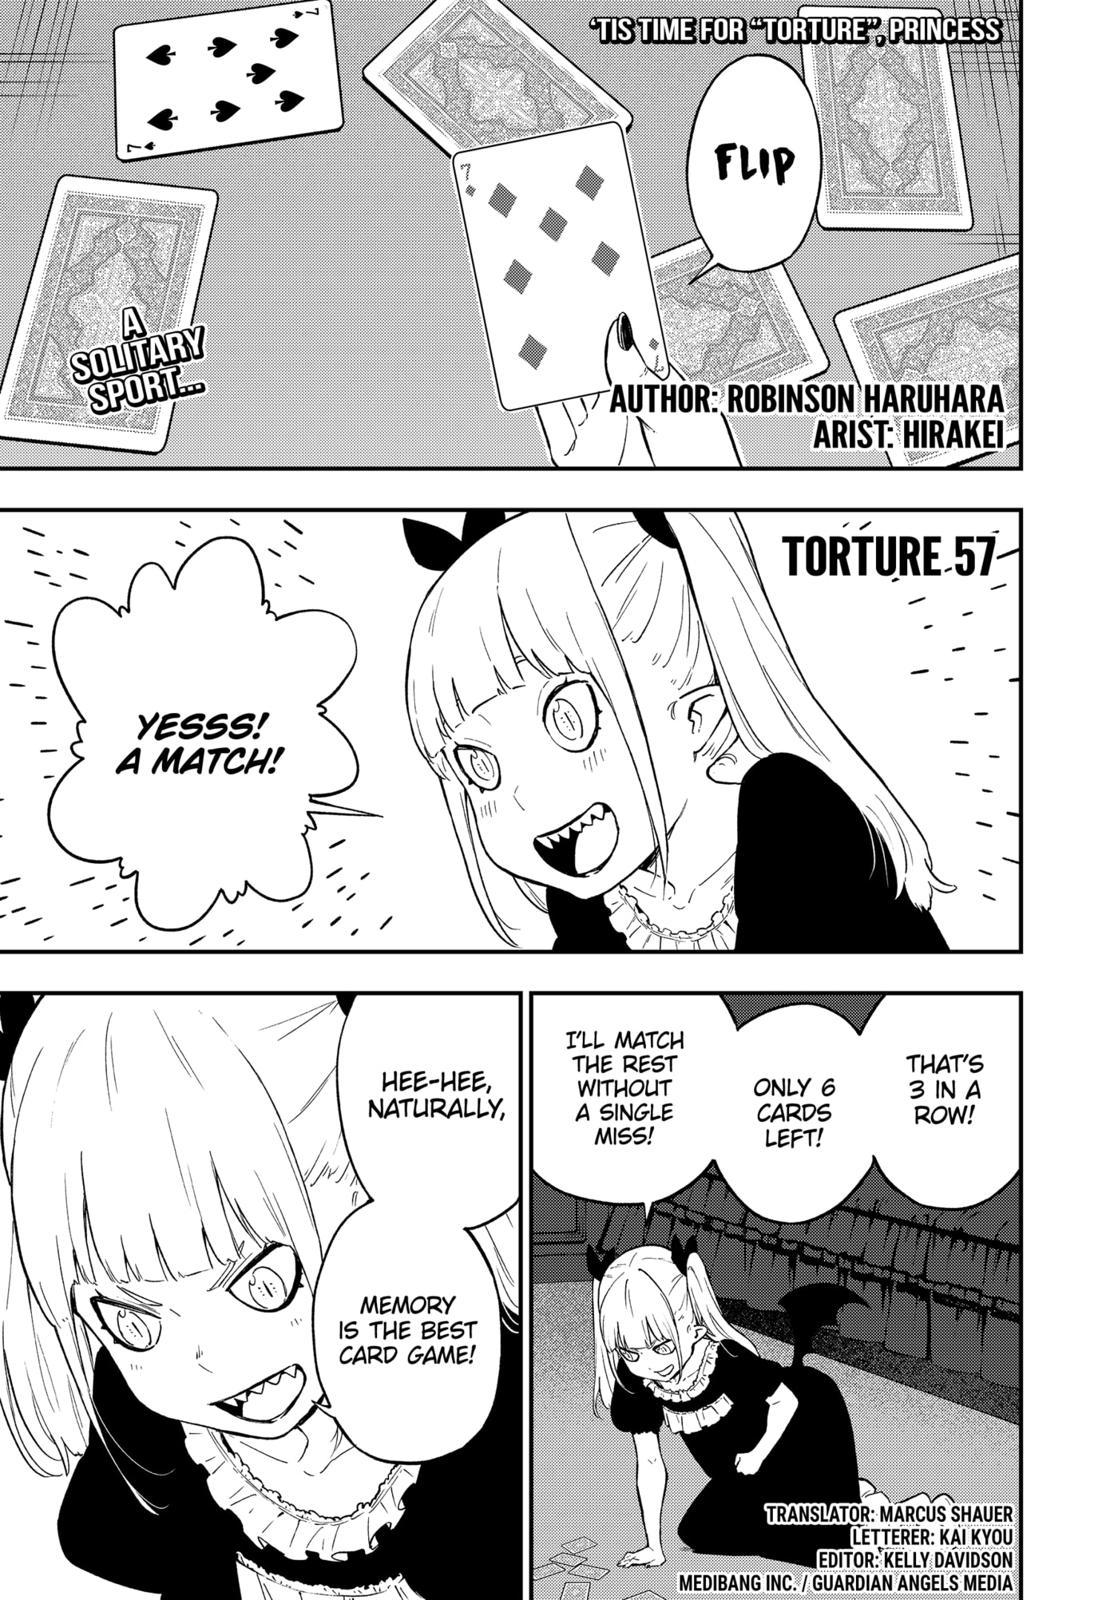 It's Time for "Interrogation", Princess! - chapter 57 - #1